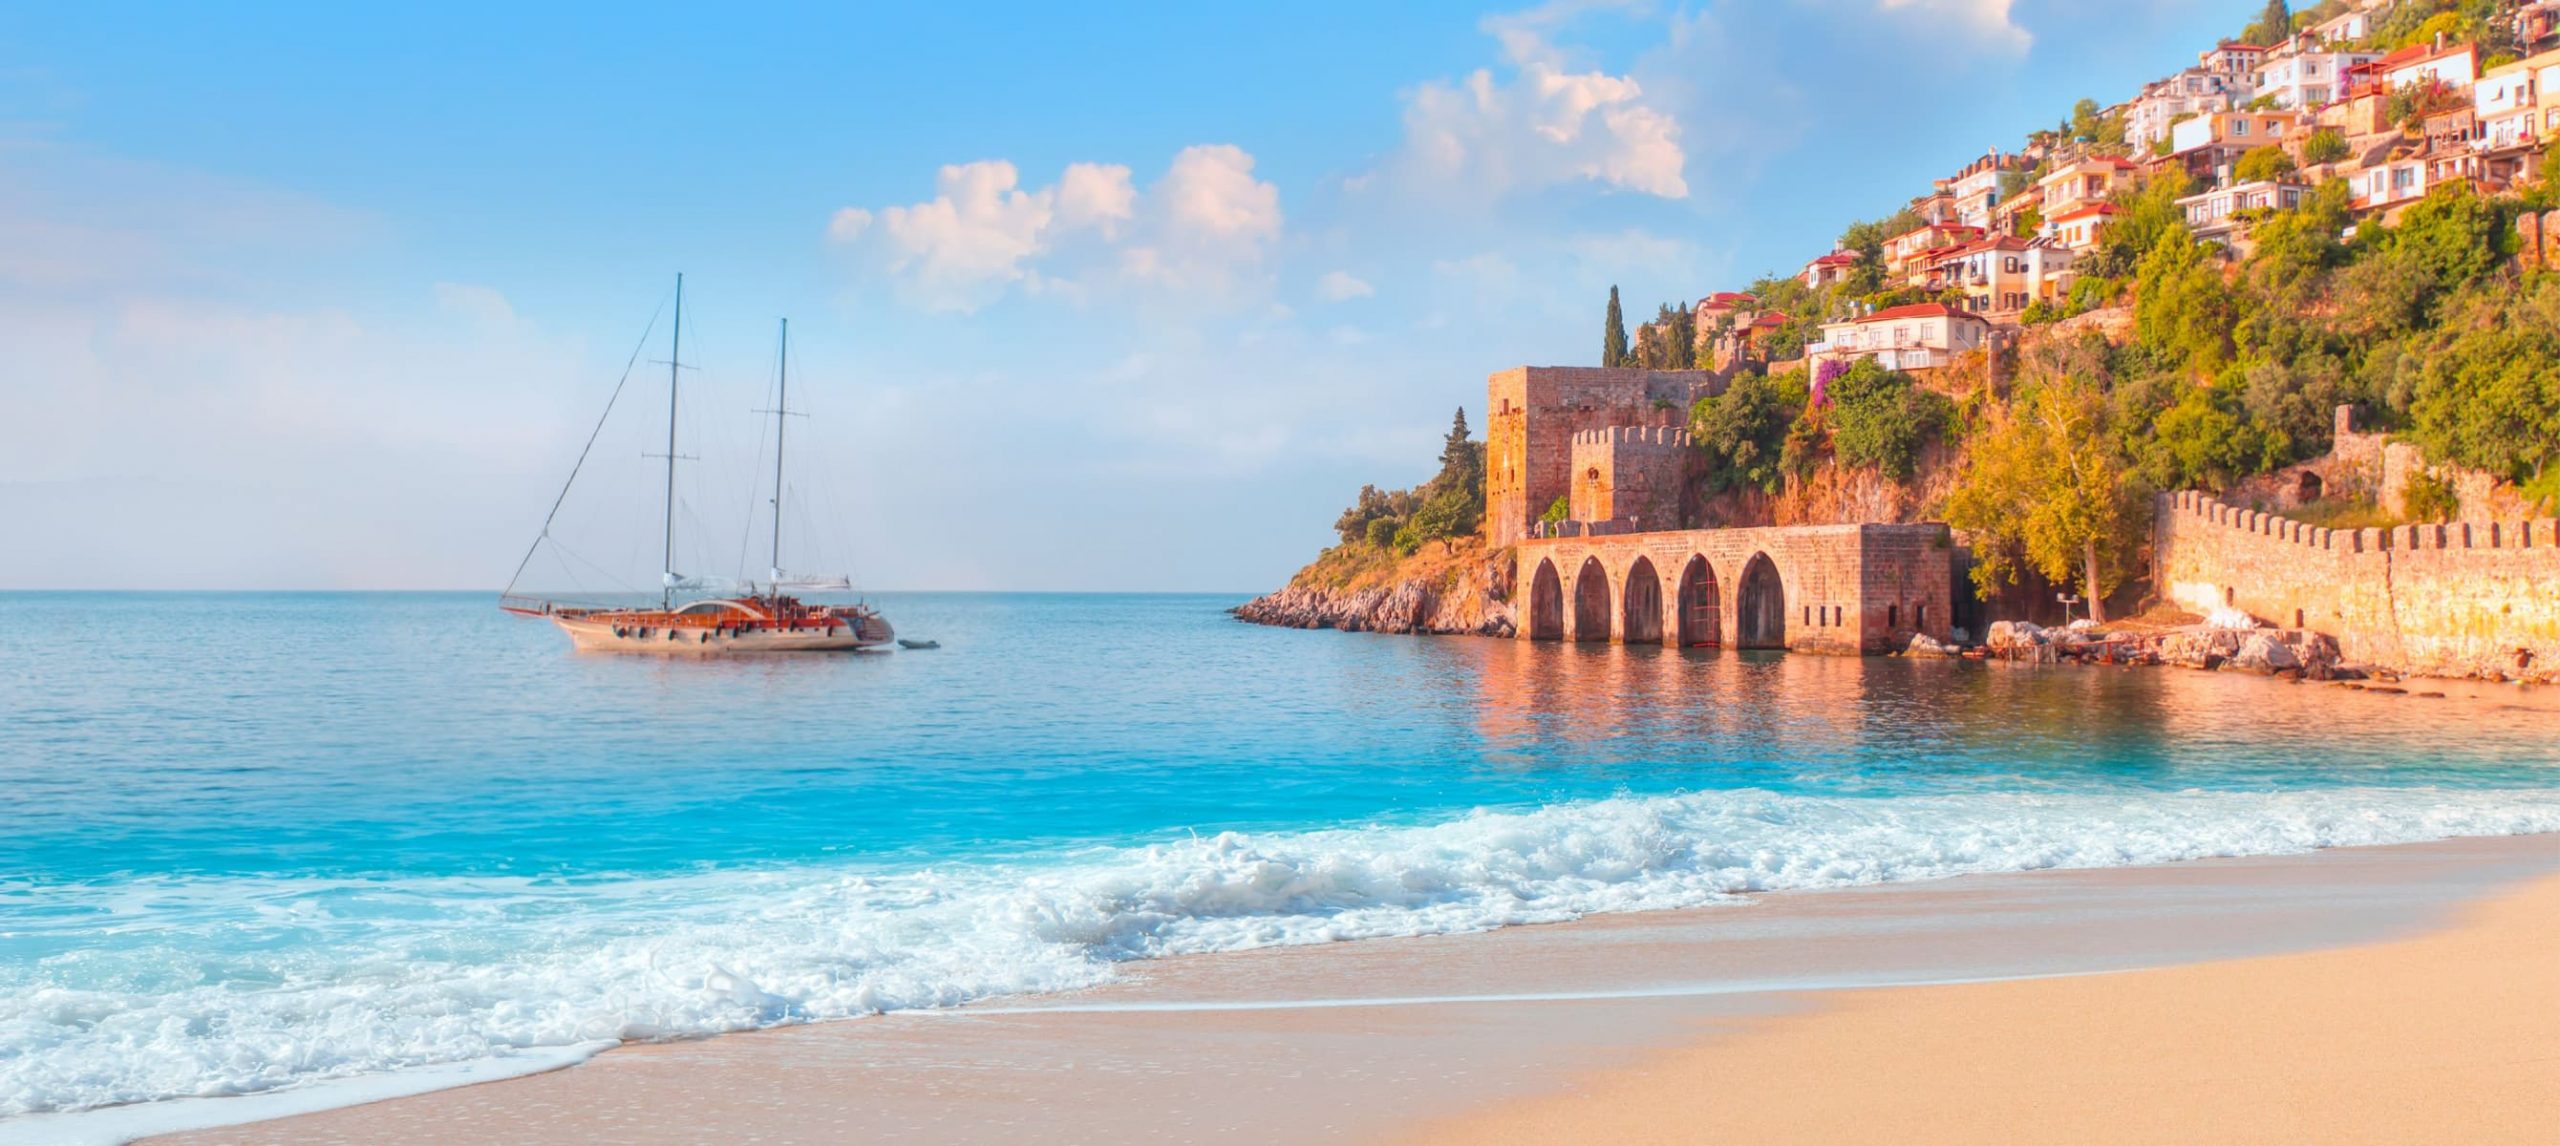 The 5 Most Beautiful Beaches In Turkey